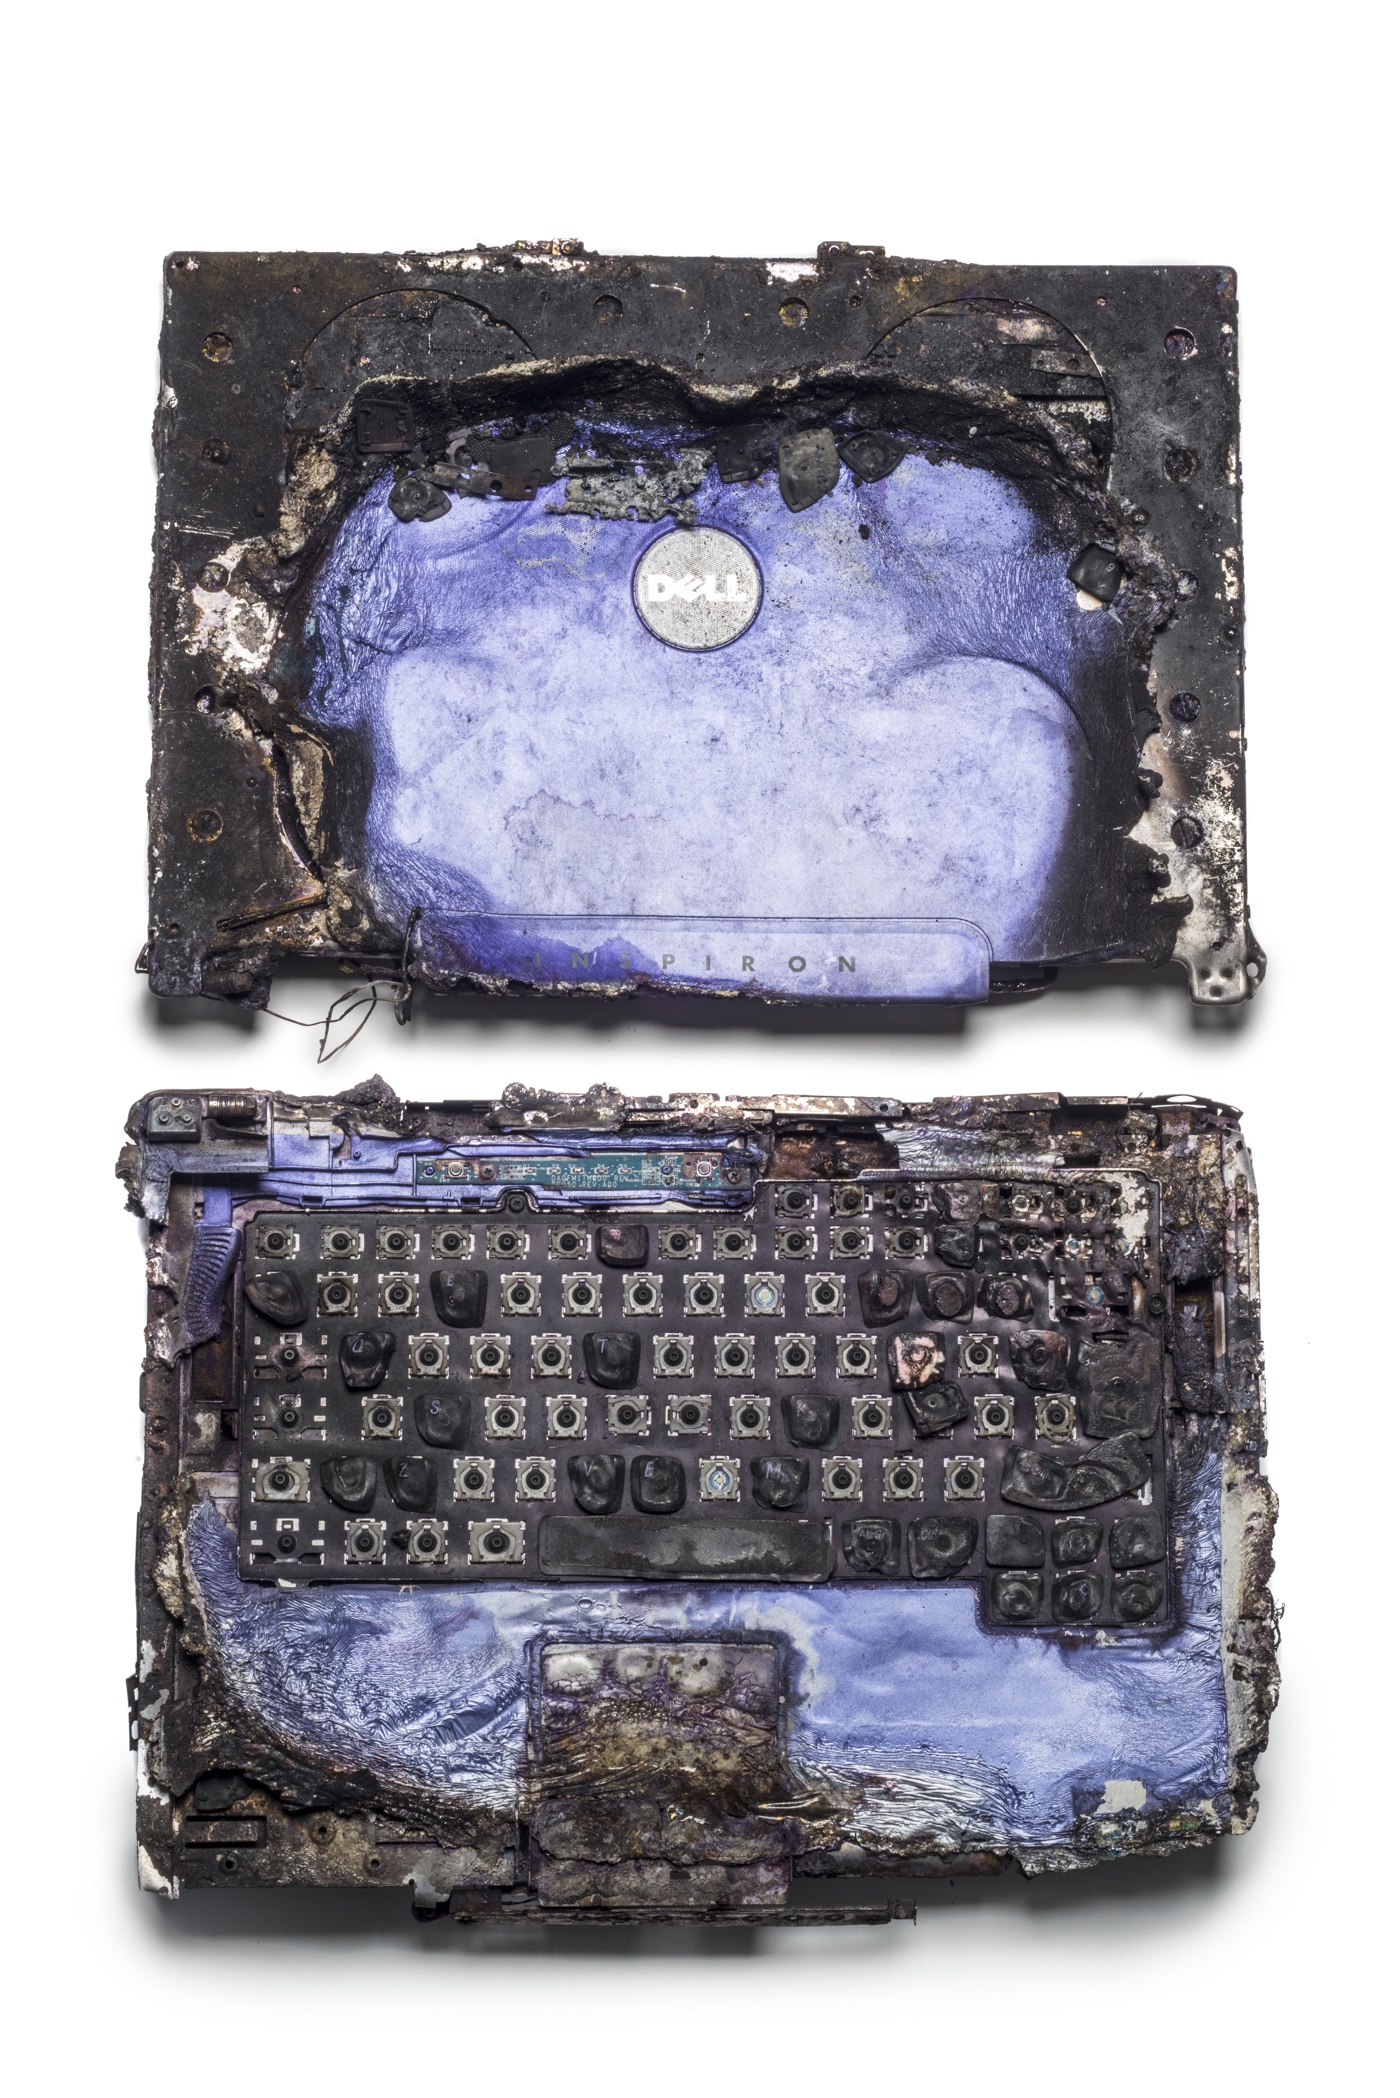 A laptop computer recovered from a car involved in the 2007 Glasgow Airport terrorist attack. Although badly burned, police were able to recover 96% of its data, crucially helping the investigation. © Museum of London / object courtesy the Metropolitan Police’s Crime Museum